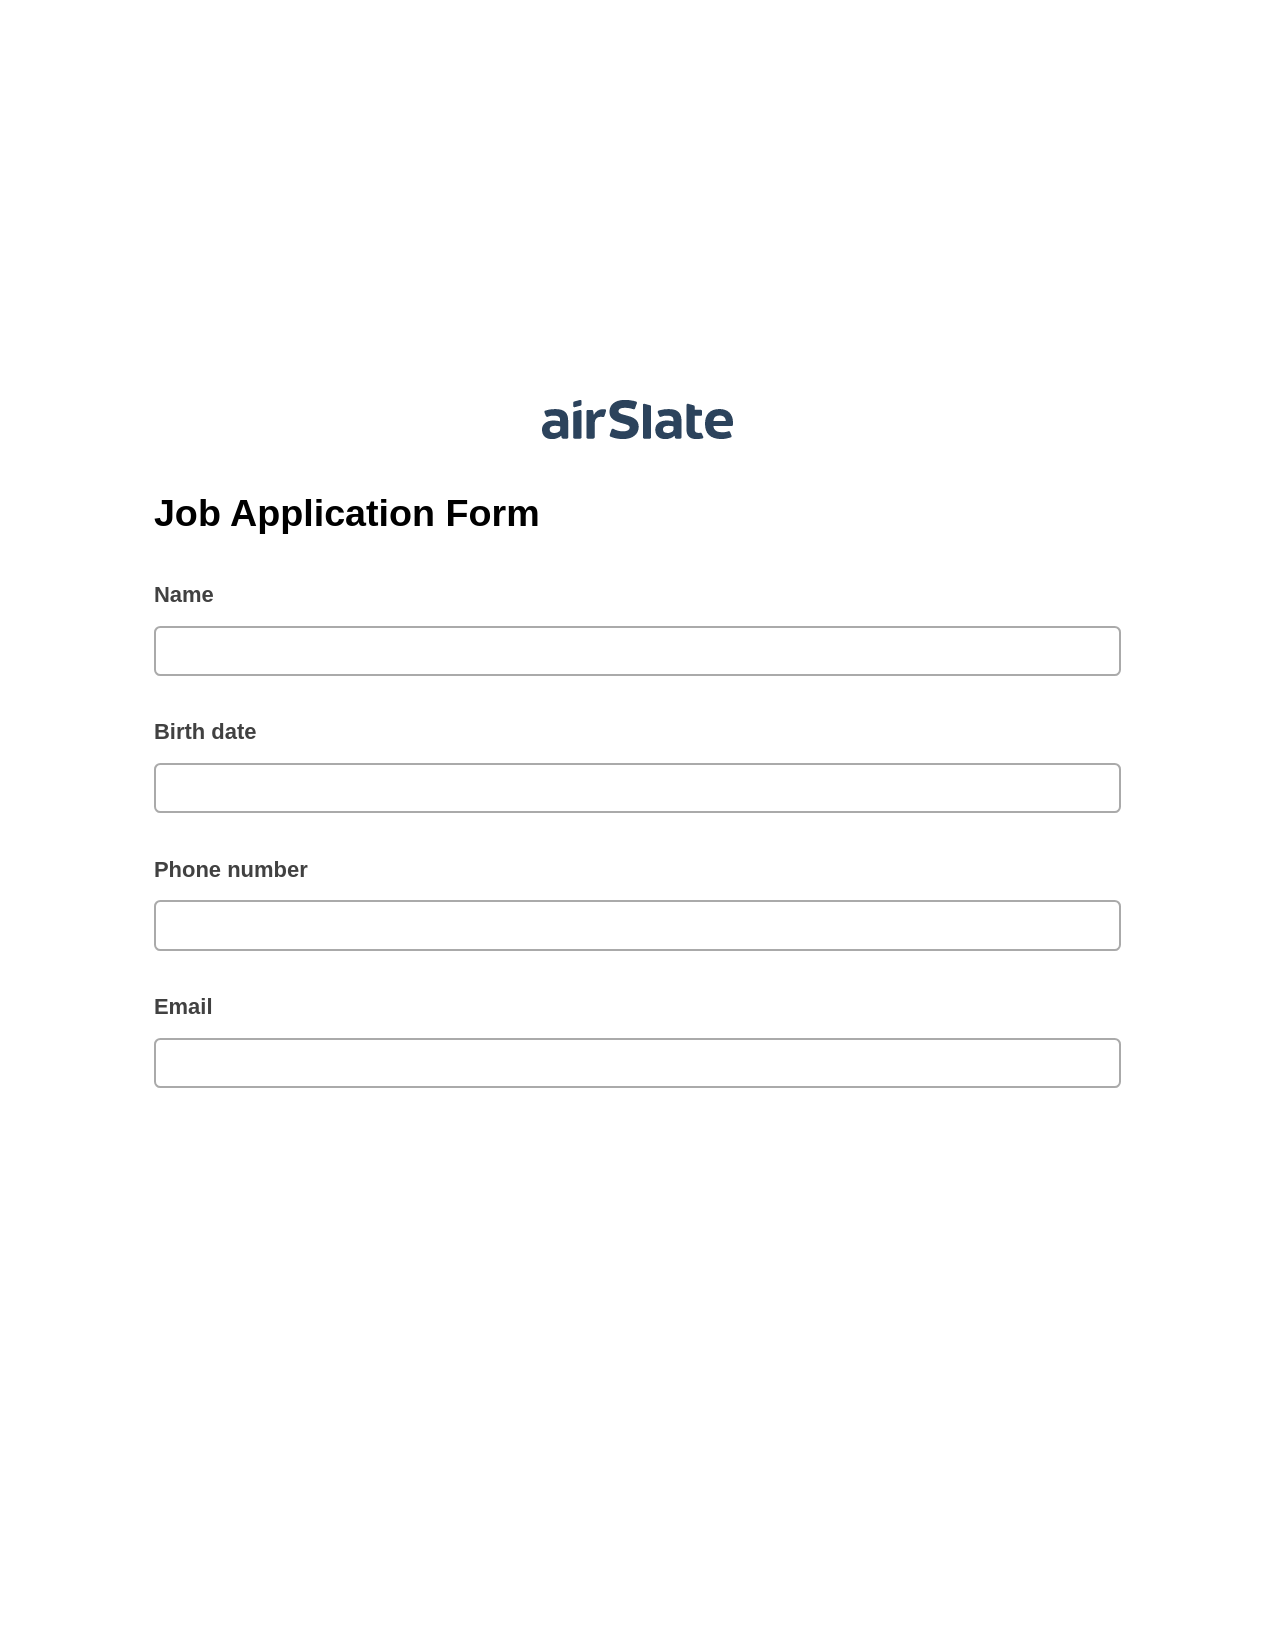 Multirole Job Application Form Pre-fill from Office 365 Excel Bot, System Bot - Create a Slate in another Flow, Dropbox Bot